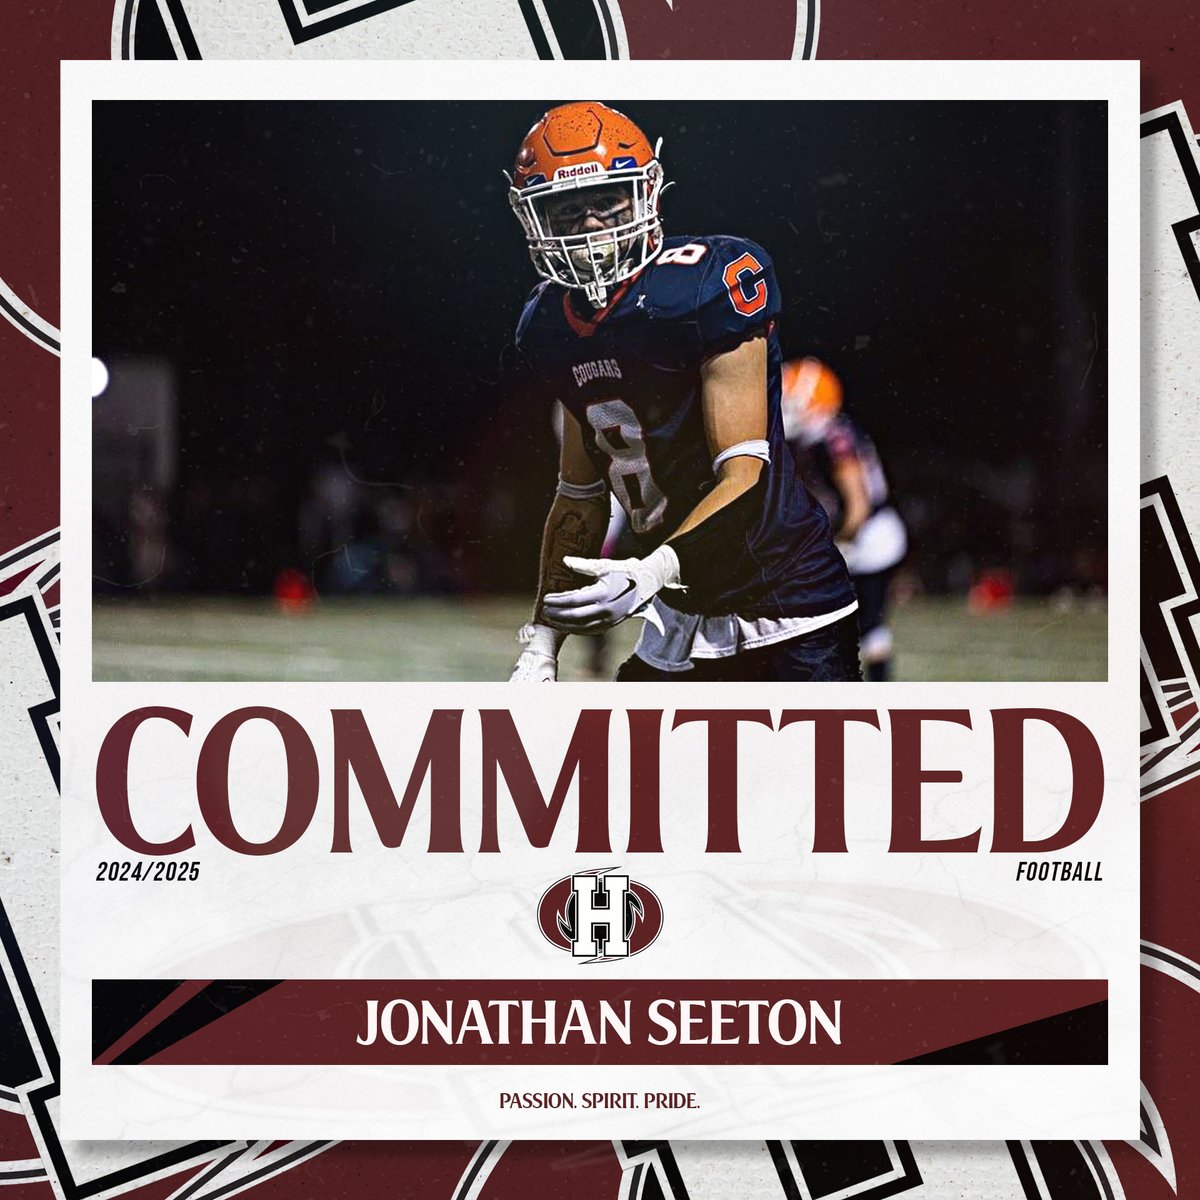 Join us in welcoming Jonathan Seeton to the Hurricanes for 2024! 👋

Sport: Football
Height: 5'10'
Position: Wide receiver
CEC Cougars
Truro, Nova Scotia

#PassionSpiritPride